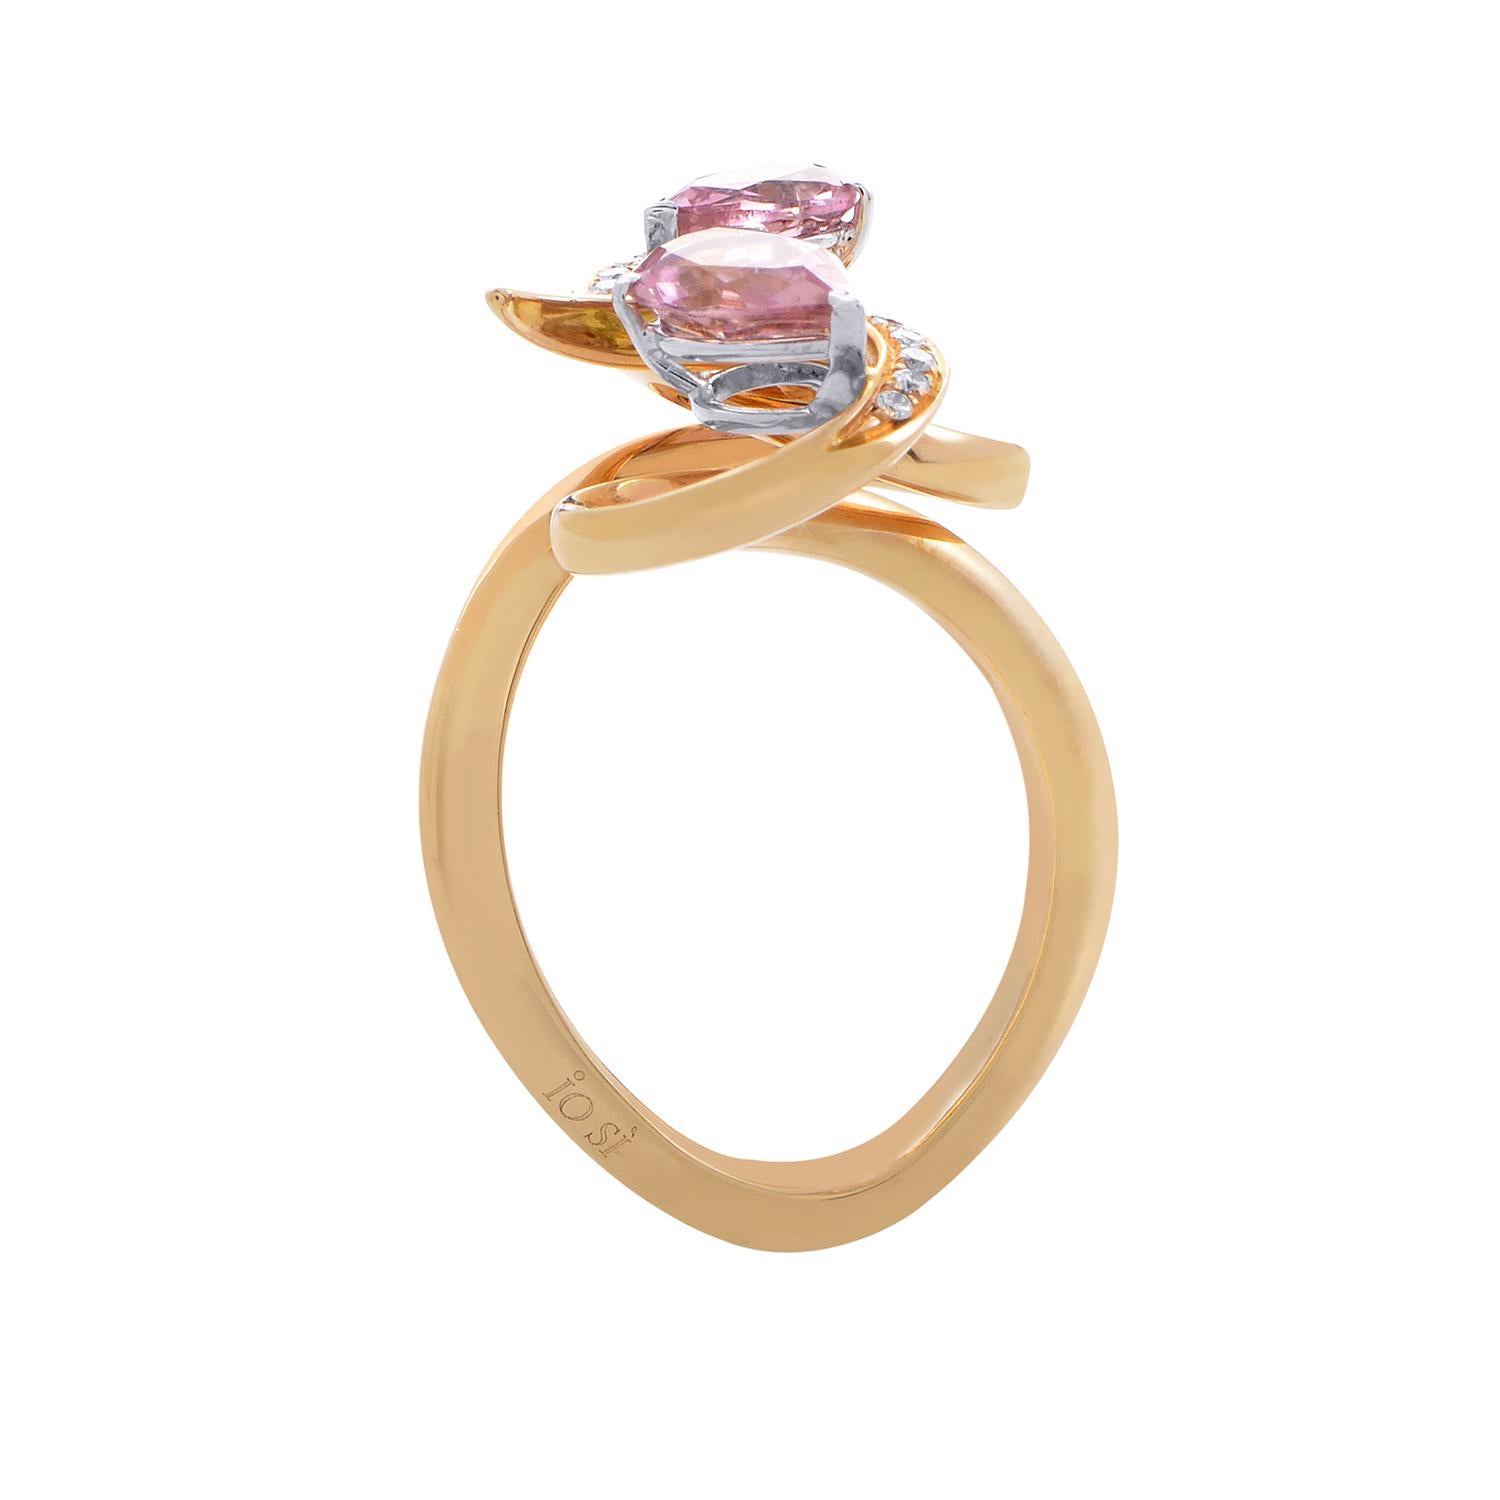 Featuring a delightfully formed body made of fabulous 18K rose gold this ring offers elegant, romantic appearance, enhanced by 0.17ct of diamonds and 0.35ct of pink sapphires used for the decoration of this Io Si masterpiece.
